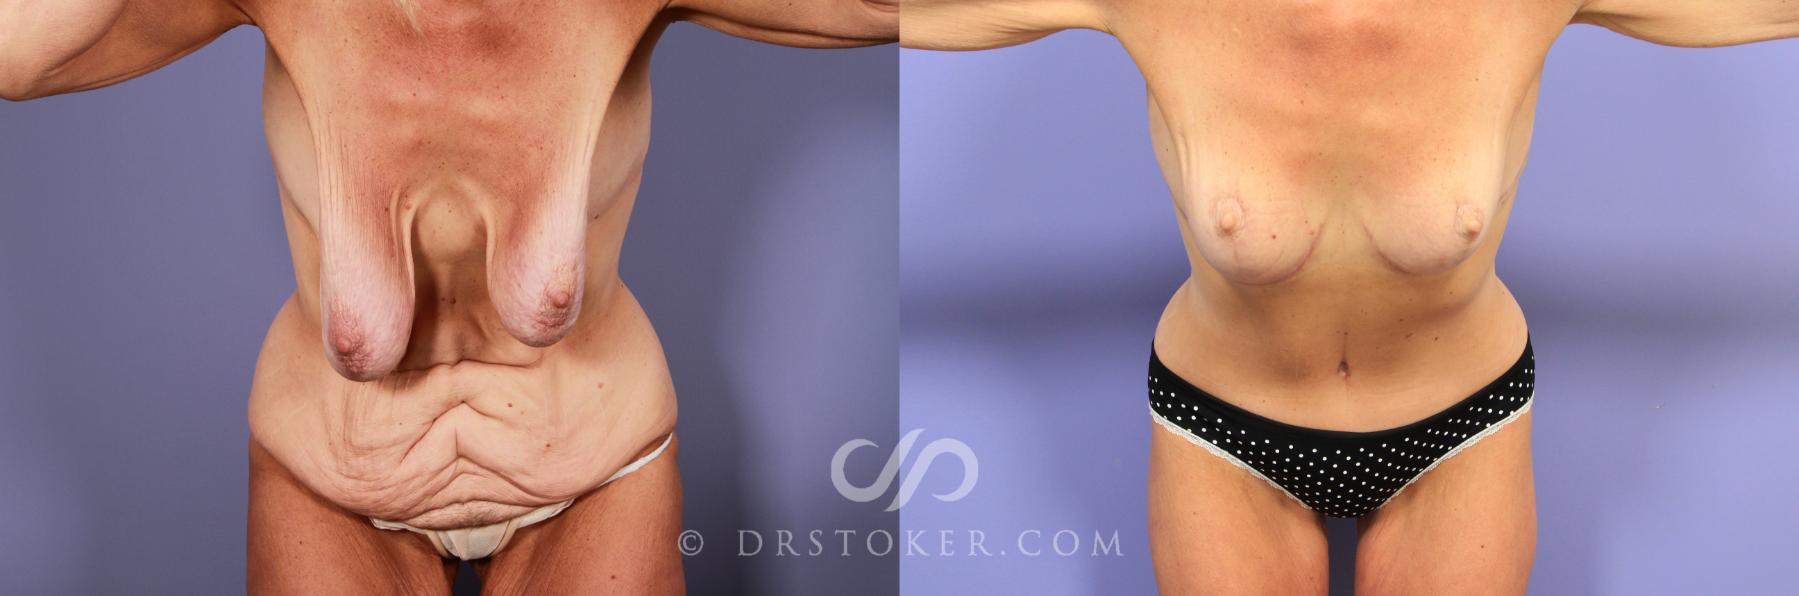 Gallery  Breast Reduction Before and After Photos